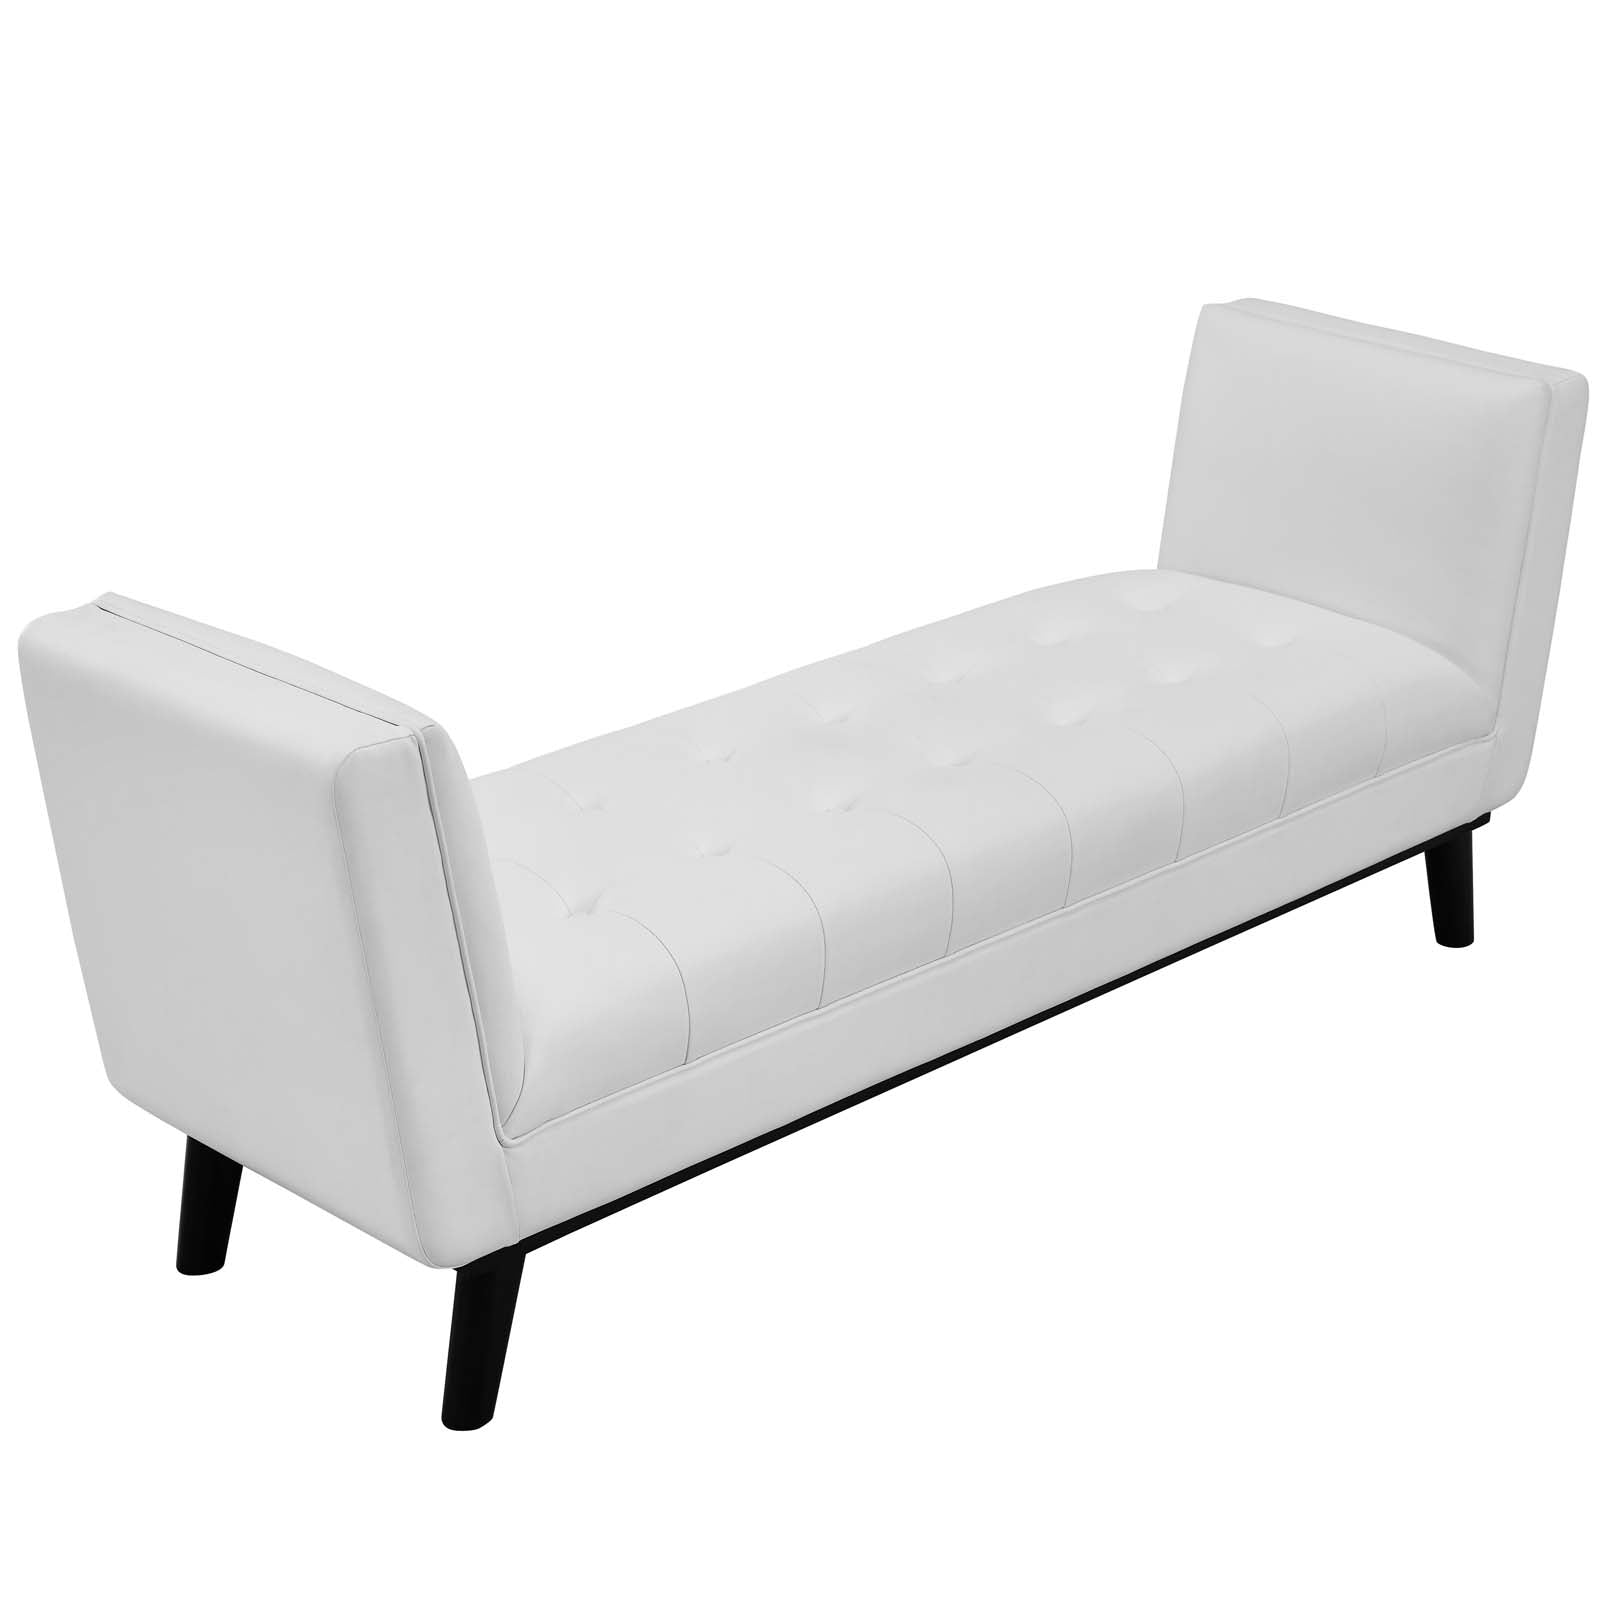 Haven Tufted Button Faux Leather Accent Bench